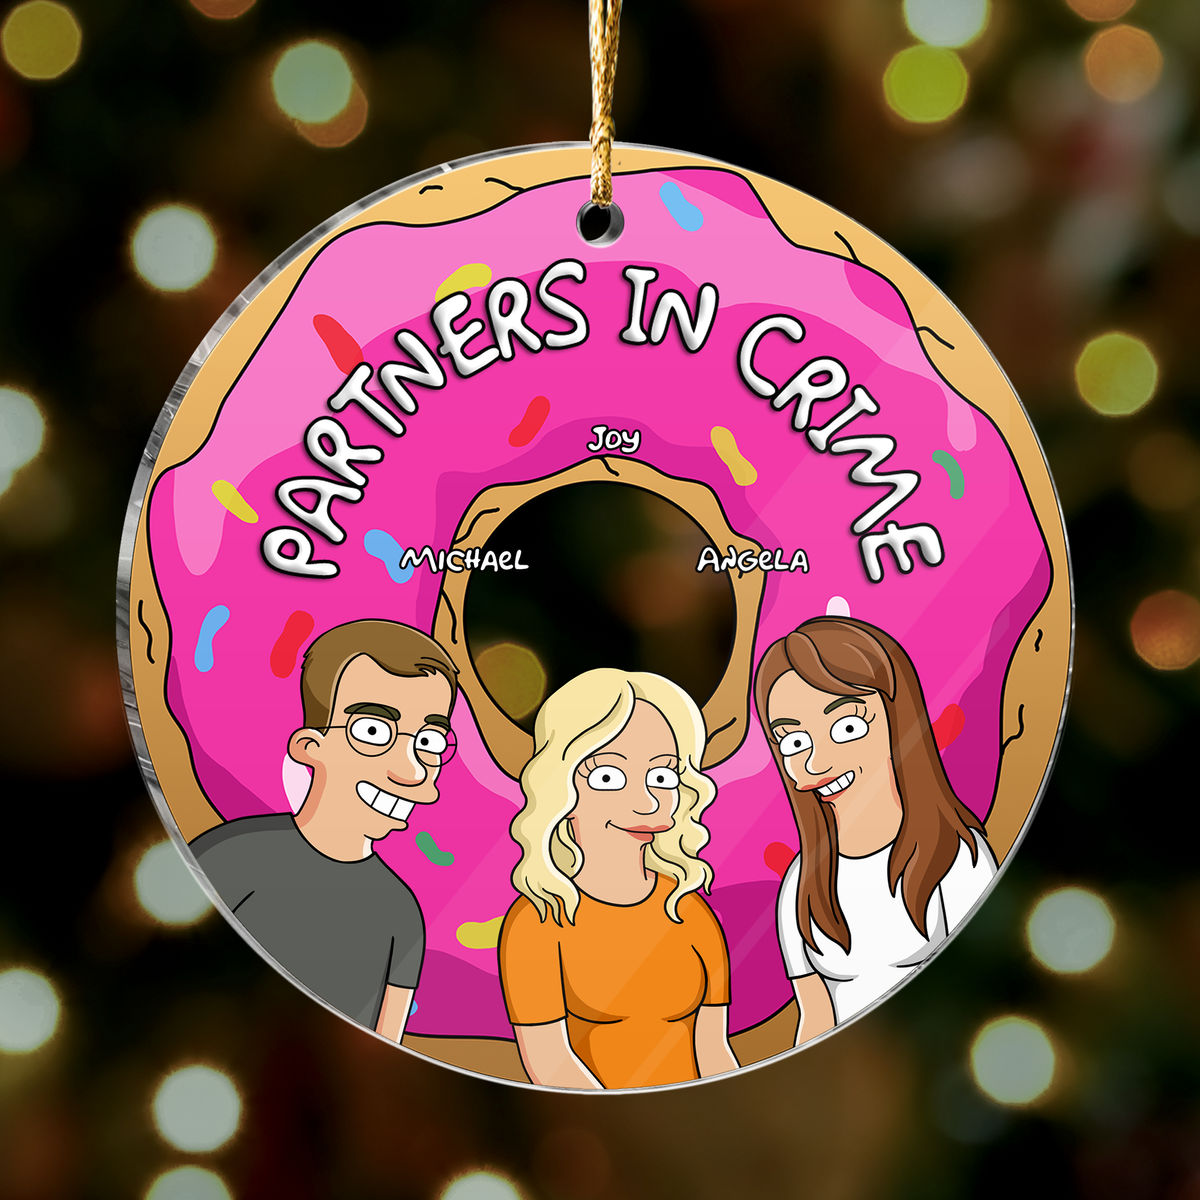 Geeky Gang - Best Coworkers Ever - Funny Christmas Gifts For Your Loved Ones - Acrylic Circle Ornament (b1)_1